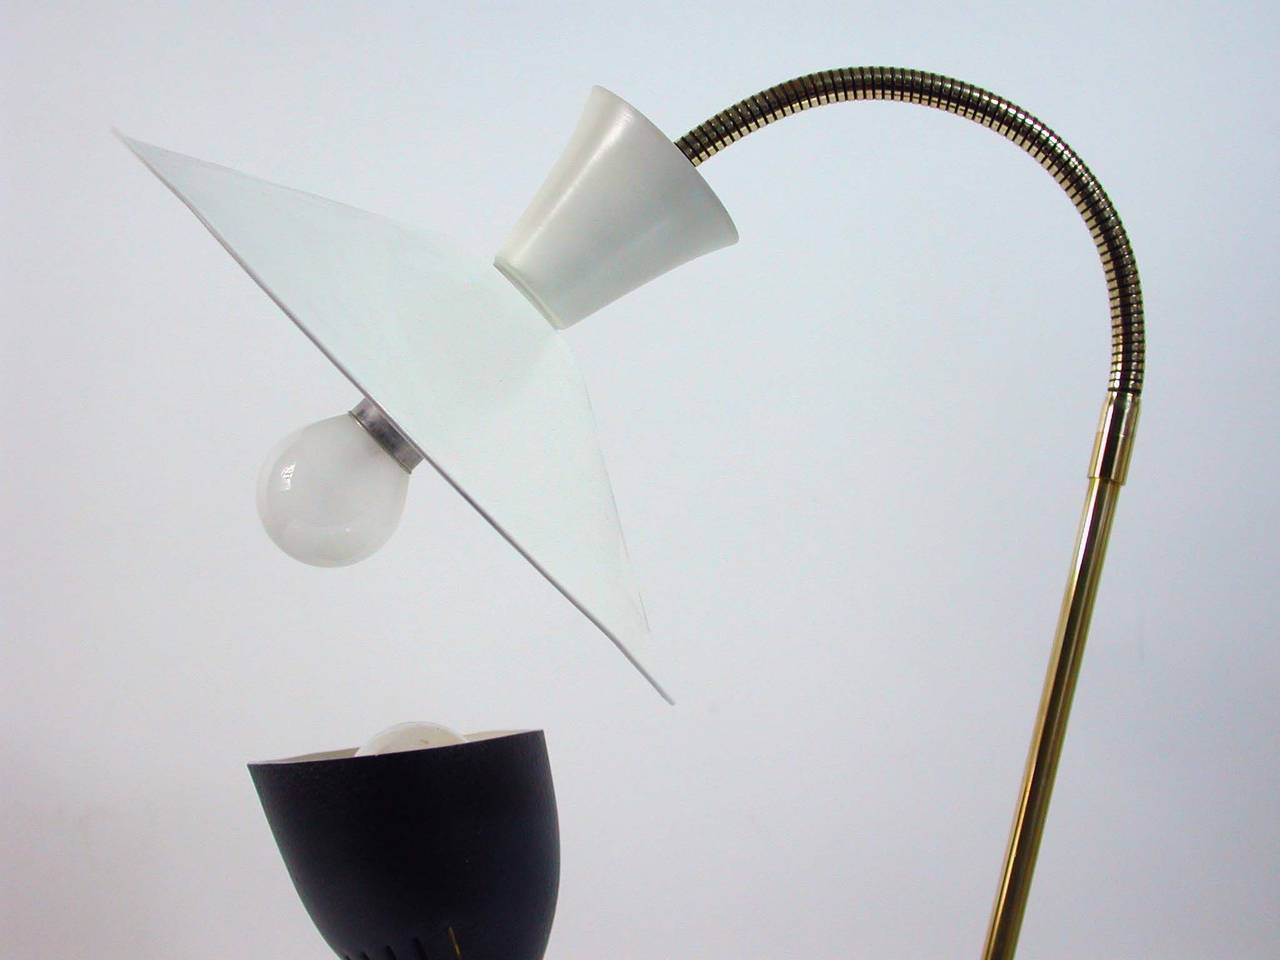 Lacquered 1950s Double Arm Table Lamp by André Lavigne for ALUMINOR Nice France